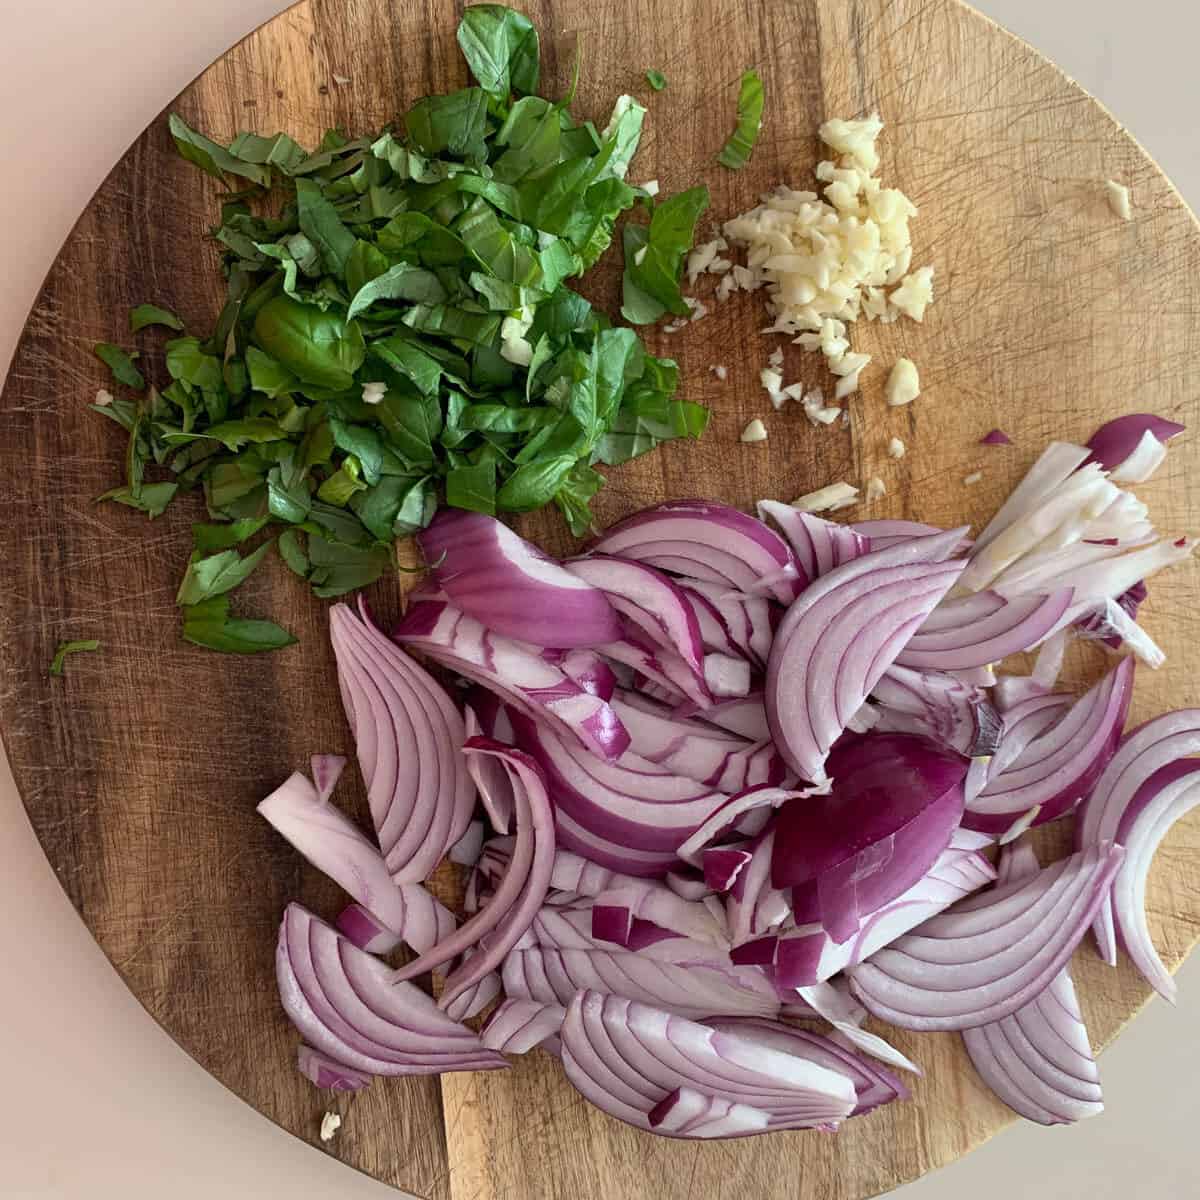 wooden cutting board with basil, red onion and garlic